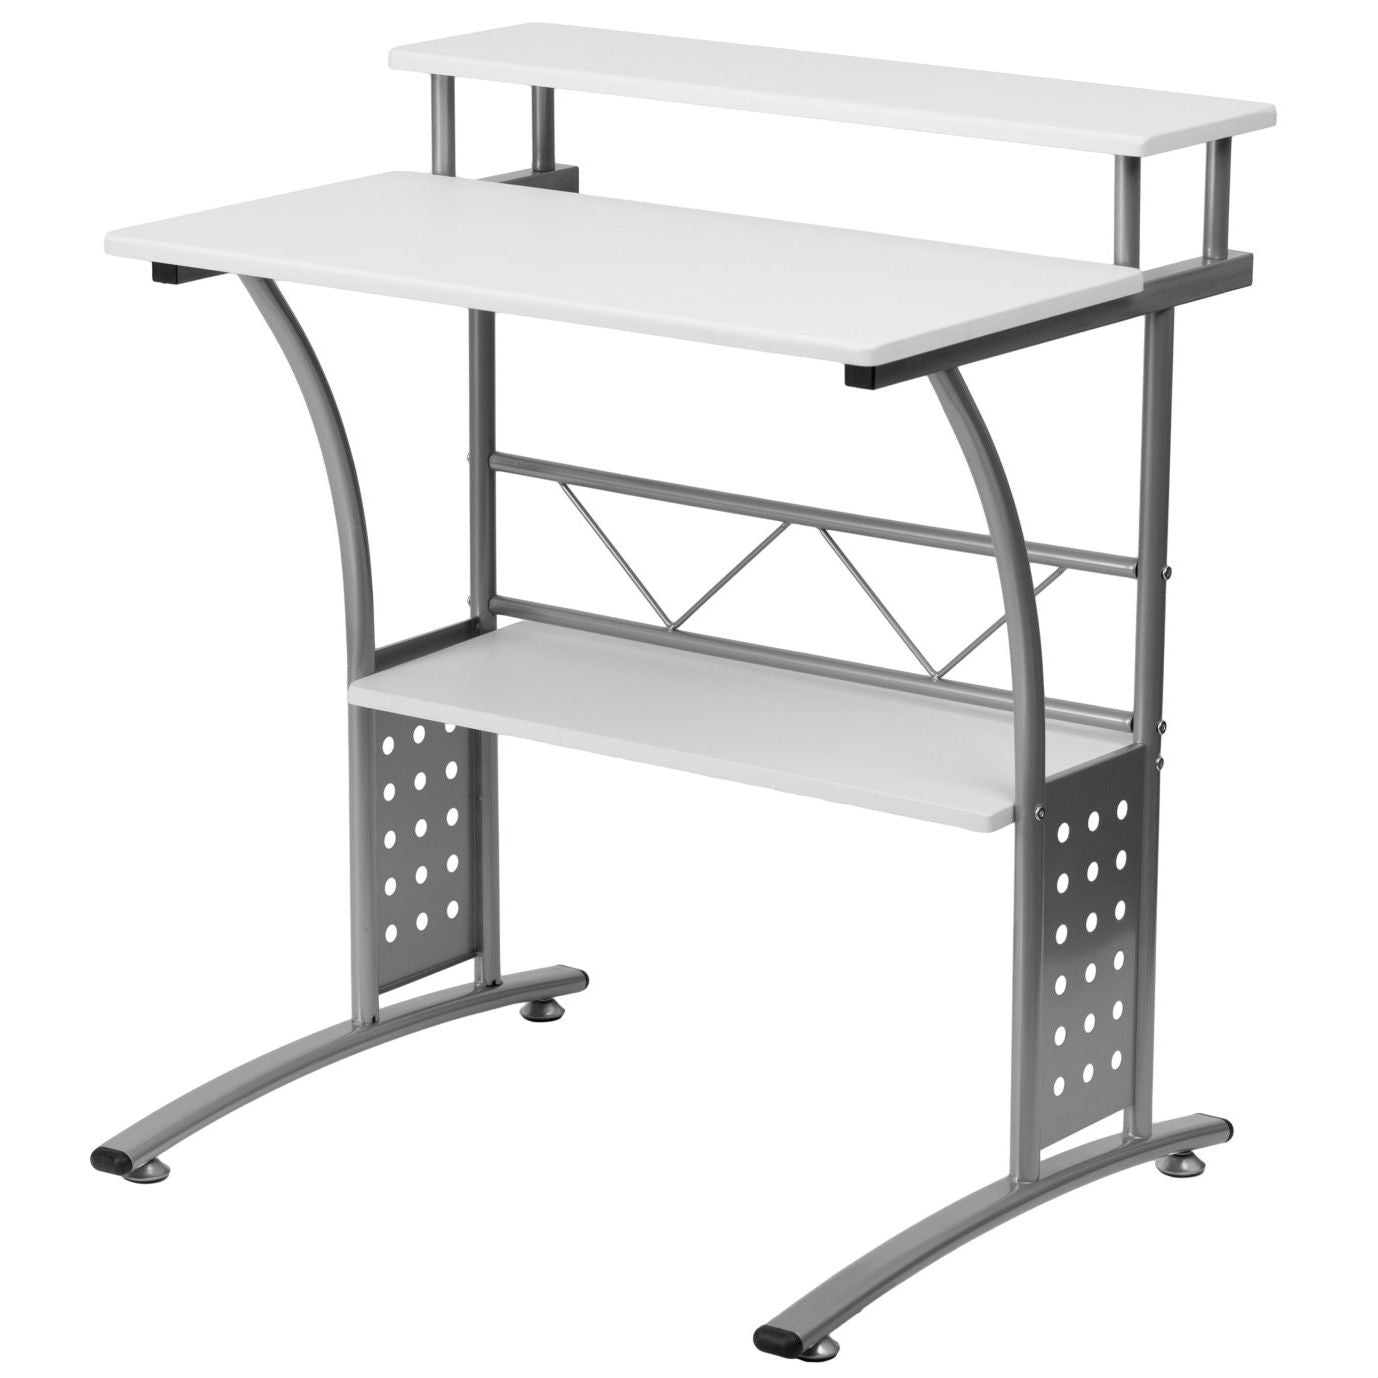 FastFurnishings Modern Metal Frame Computer Desk with White Laminate Top and Raised Shelf